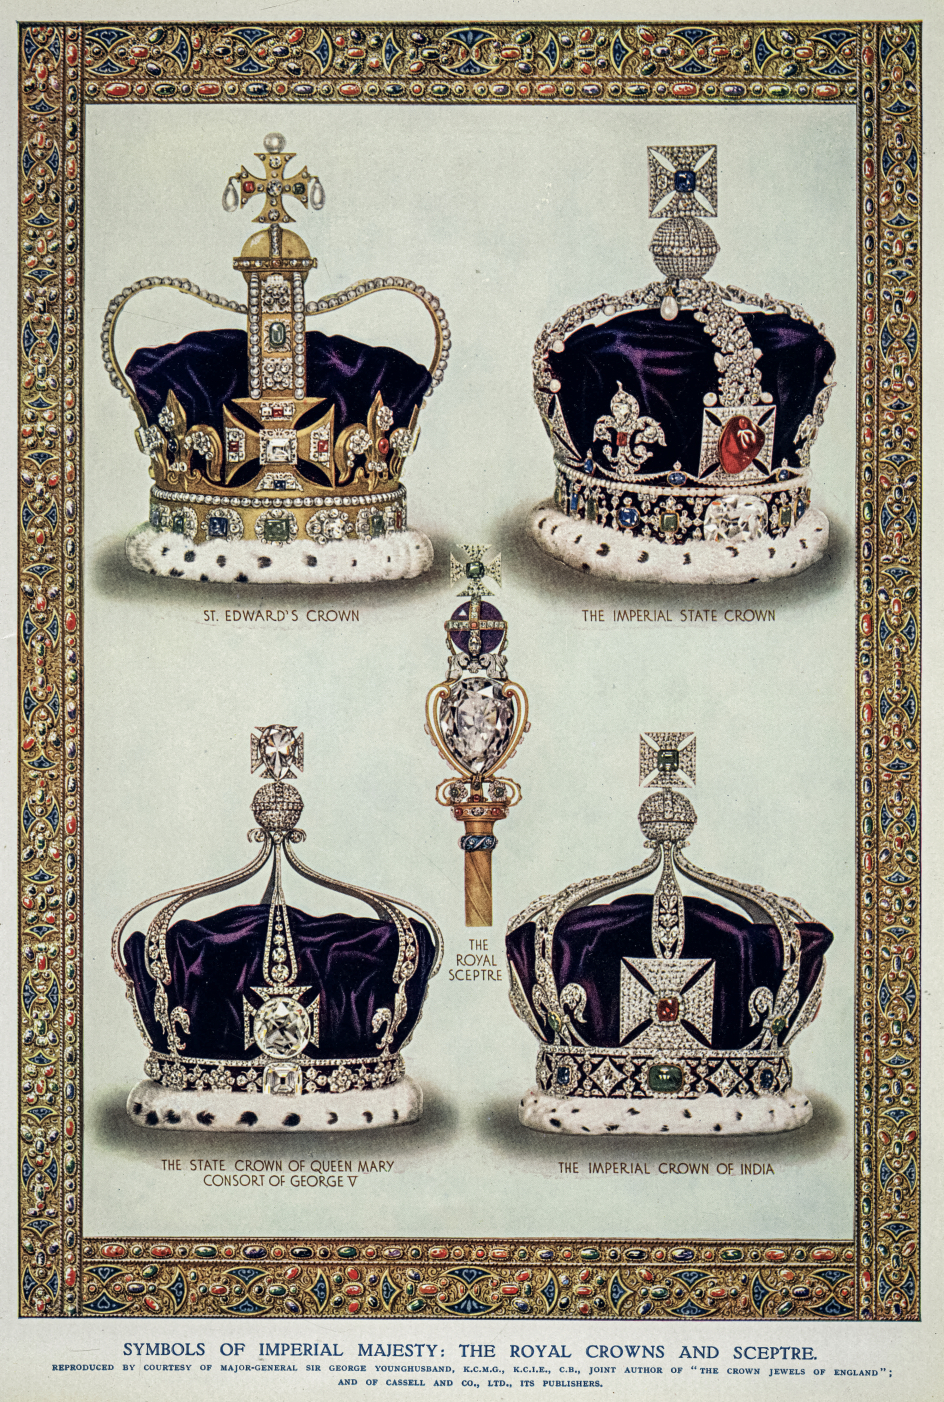 The royal crowns and sceptre